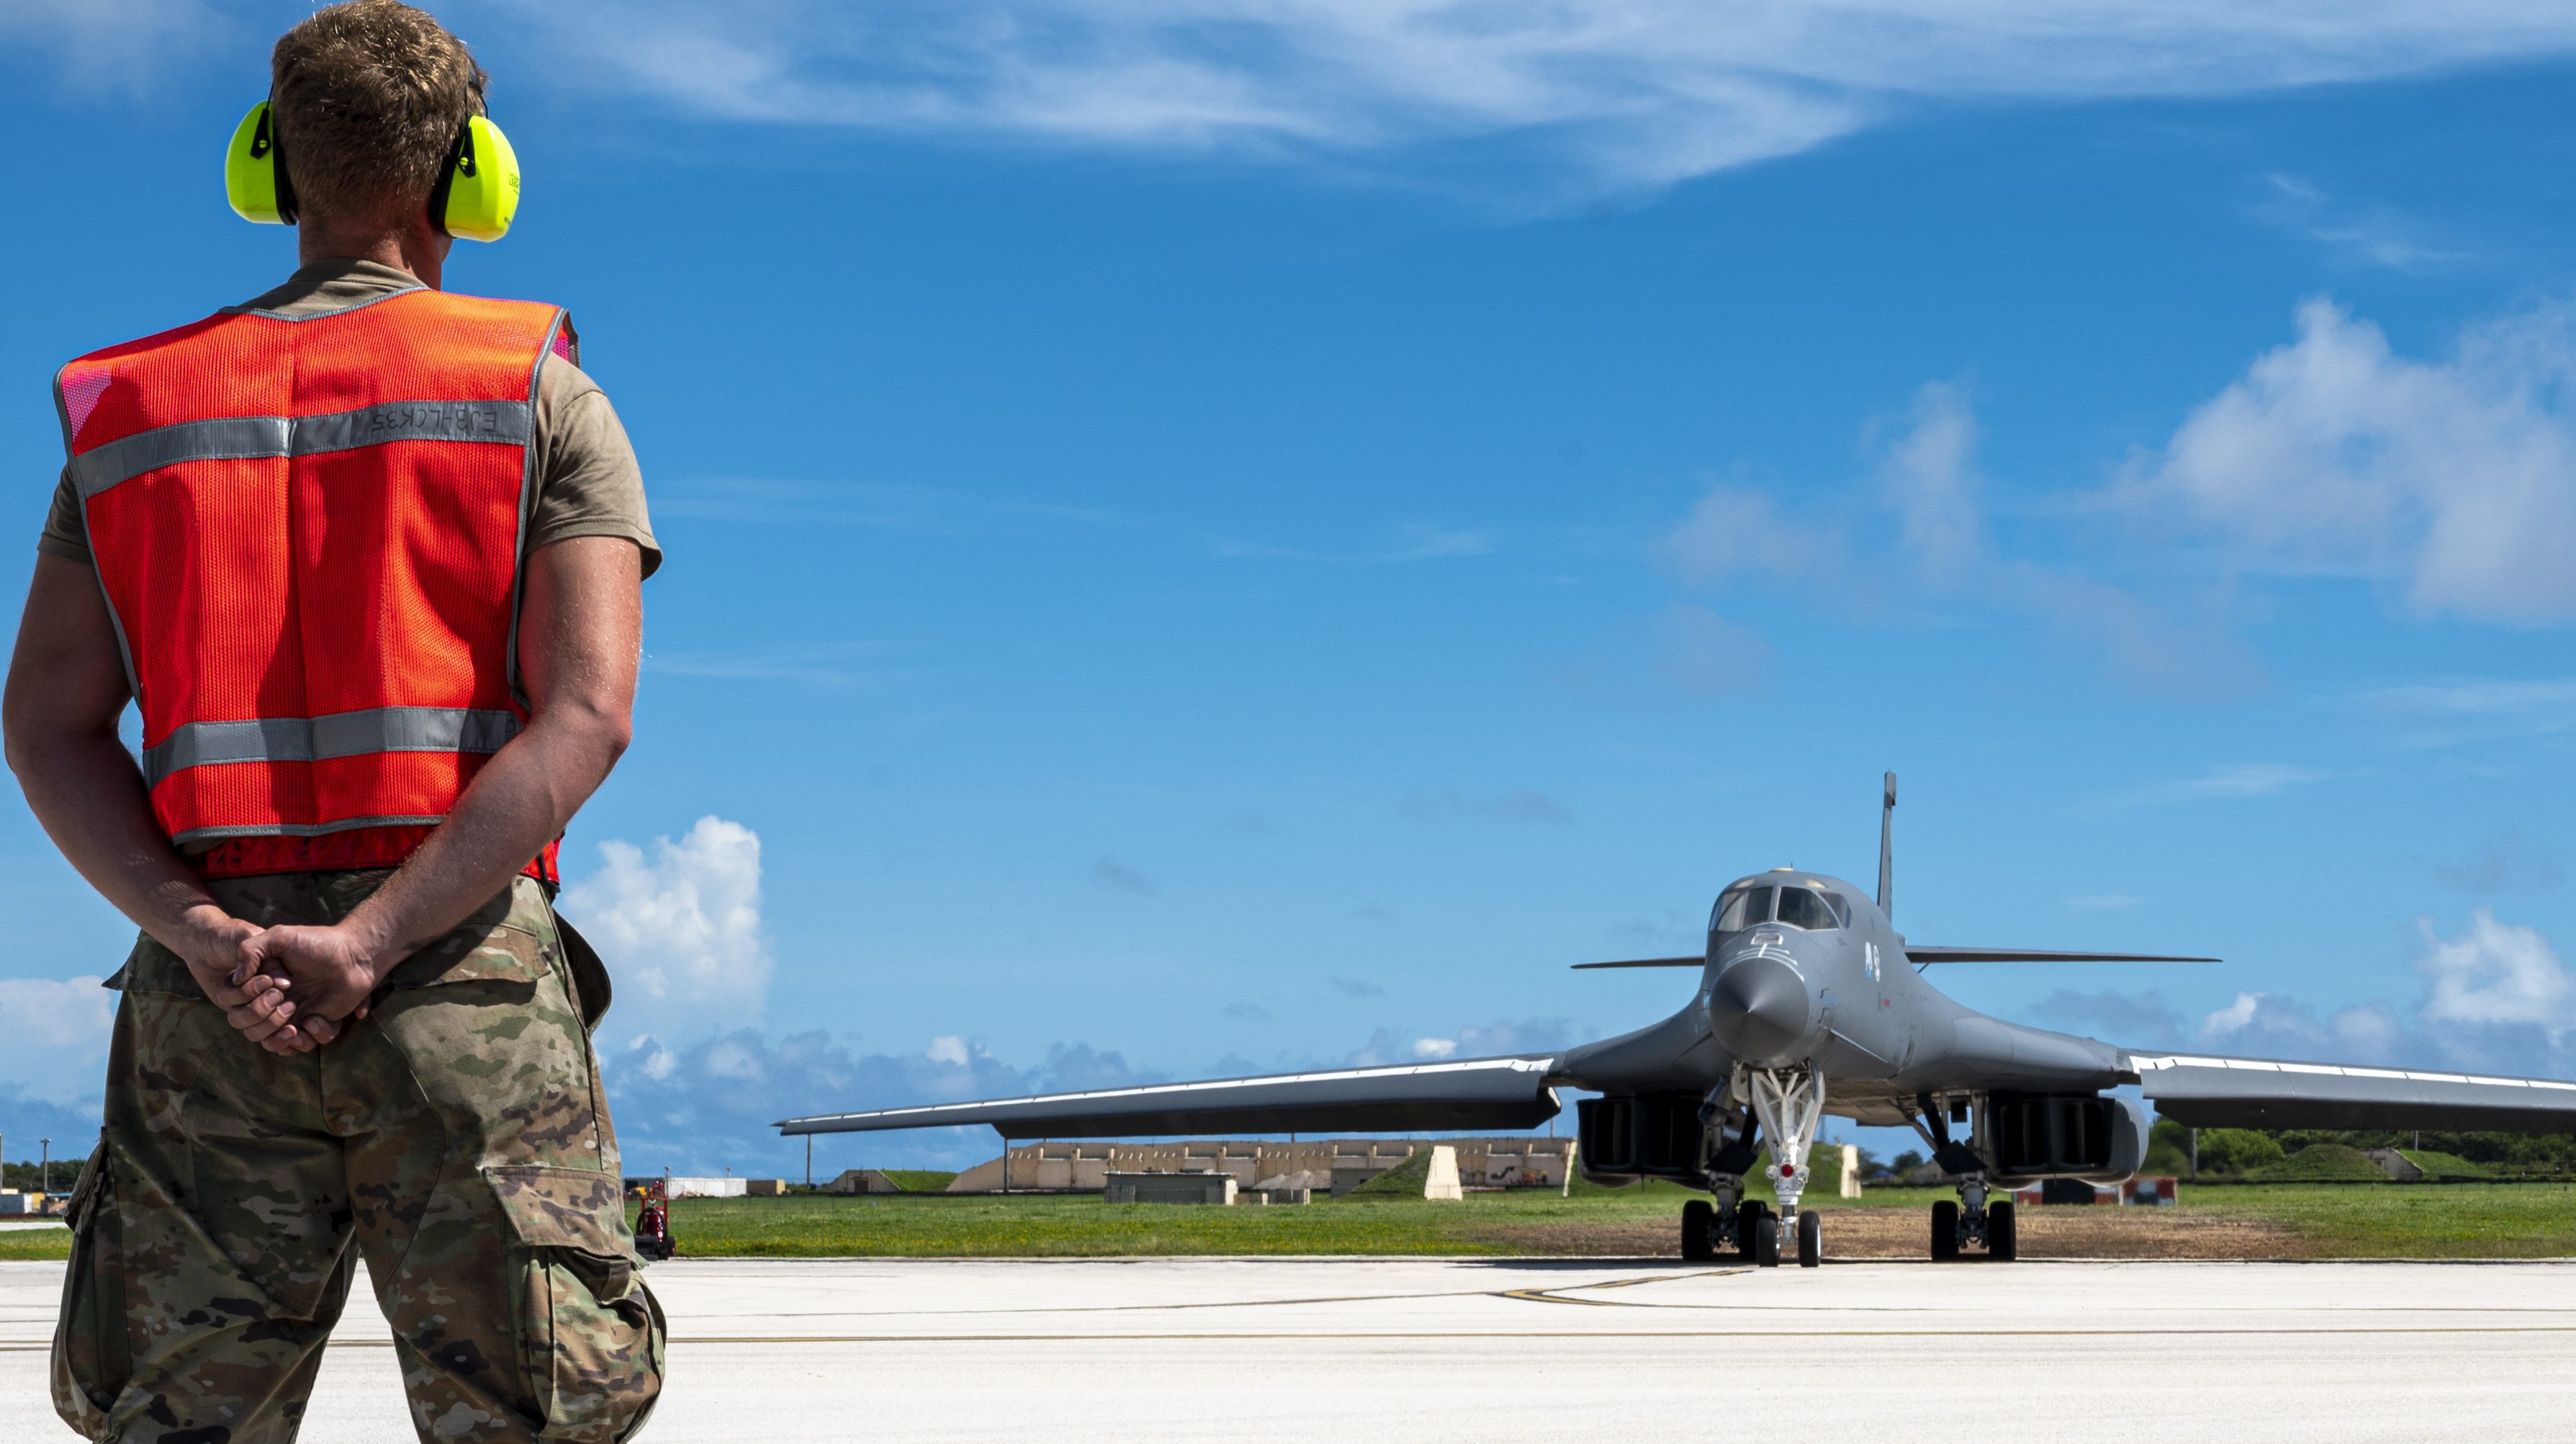 An aircraft maintainer, assigned to 34th Aircraft Maintenance Unit, prepares to marshal a U.S. Air Force B-1B Lancer, assigned to 34th Expeditionary Bomb Squadron, to takeoff from Andersen Air Force Base, Guam, to support a Bomber Task Force mission, June 29. Bomber Task Force missions provide opportunities to train alongside our allies and partners to build interoperability and bolster our collective ability to support a free and open Indo-Pacific. (U.S. Air Force photo by Master Sgt. Nicholas Priest)